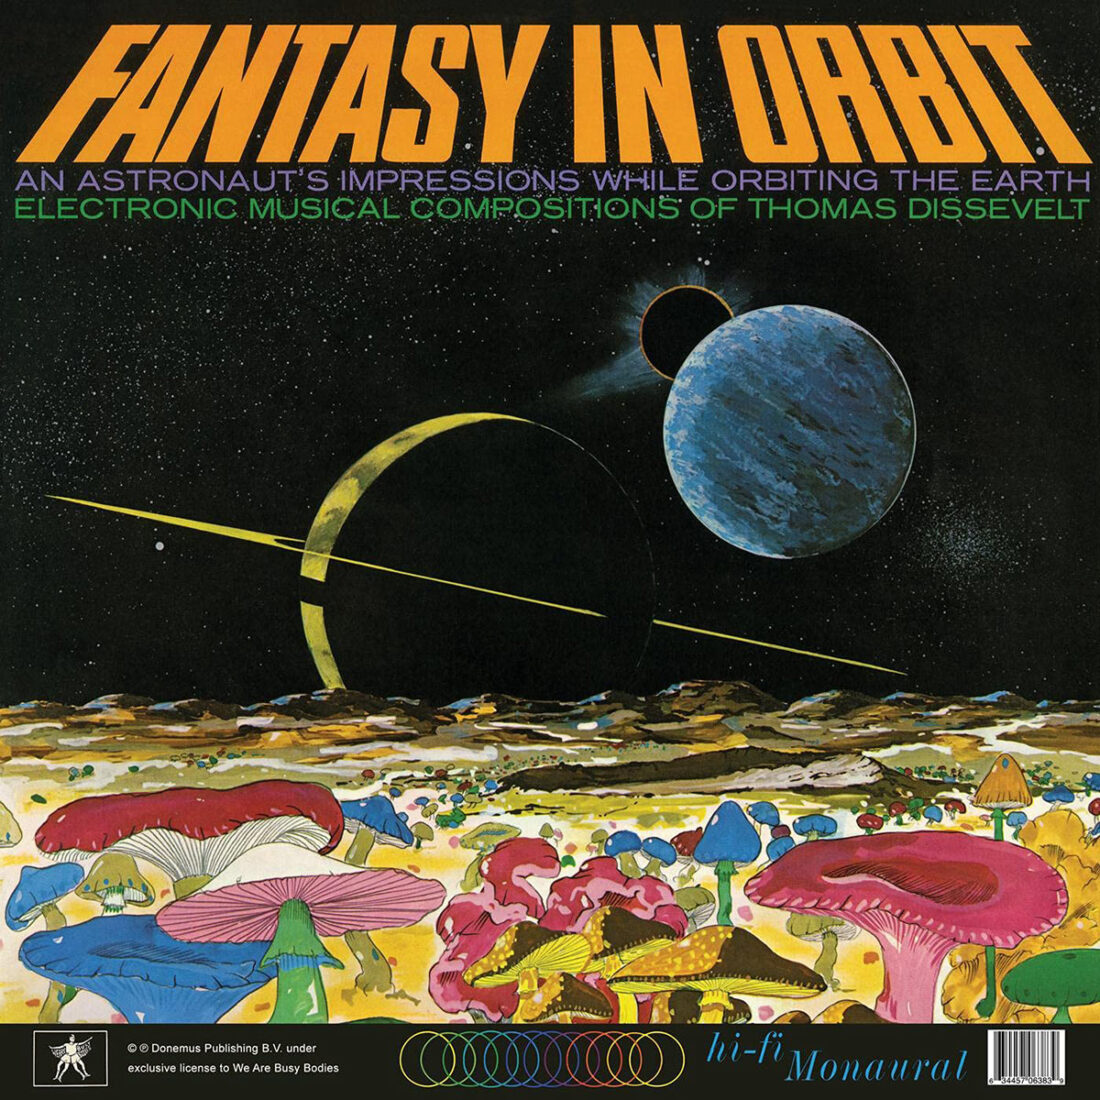 Fantasy in Orbit – Compositions of Dutch Electronic Music Pioneer Tom Dissevelt Double Vinyl Edition